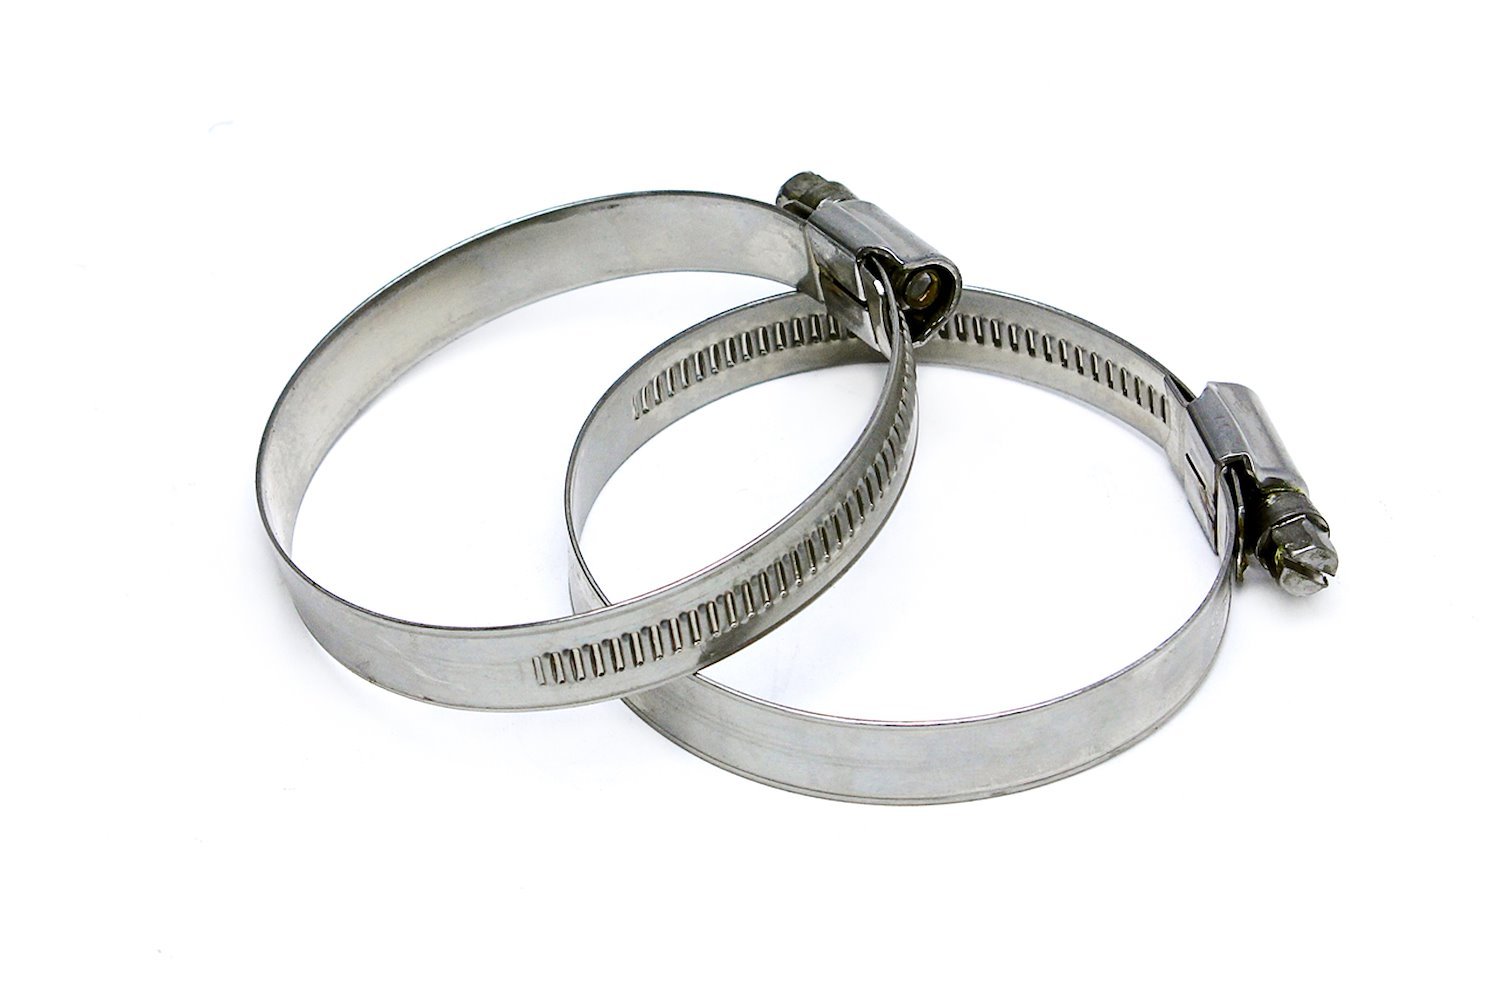 EMSC-140-160x2 Embossed Hose Clamp, Stainless Steel Embossed Hose Clamp, Size #96, Effective Range: 5-5/8 in.- 6-1/2 in., 2Pc